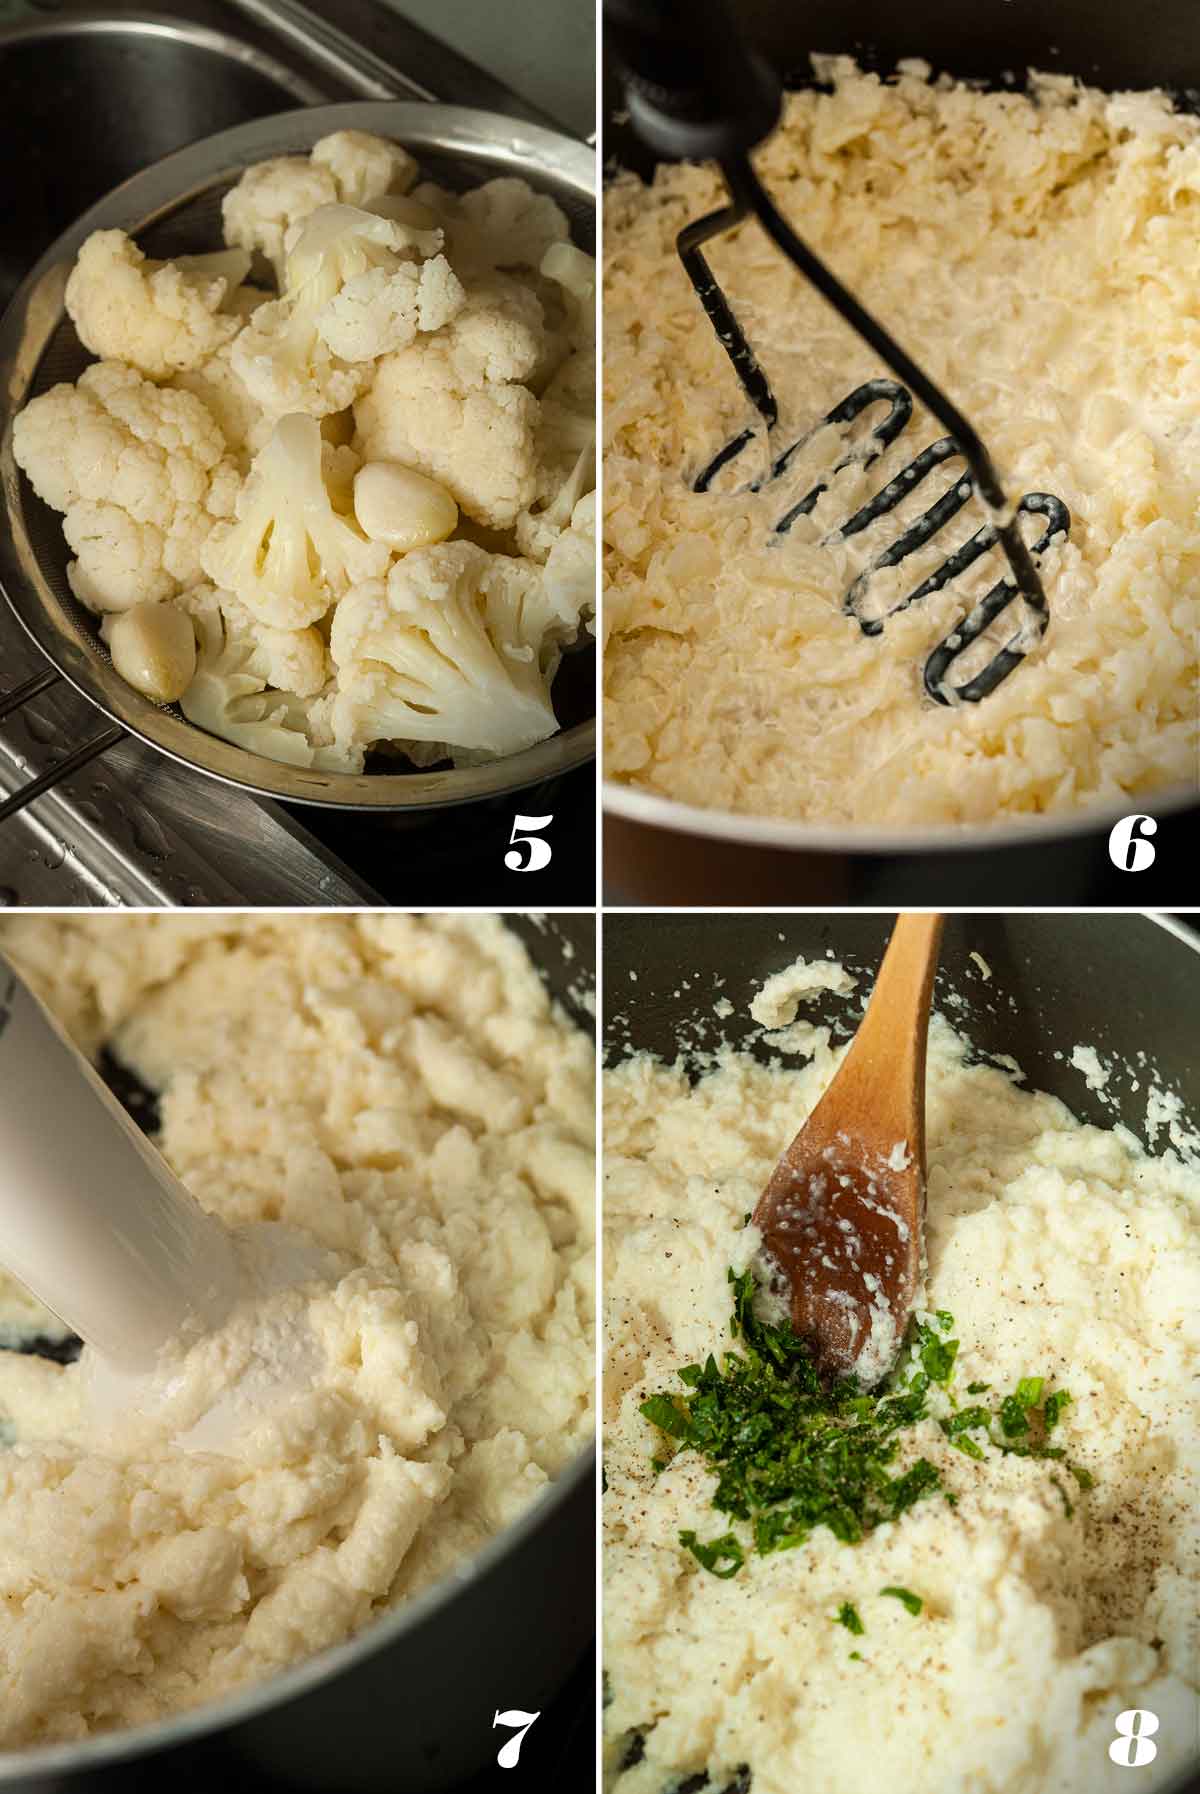 A collage of 4 images showing how to make mashed cauliflower.